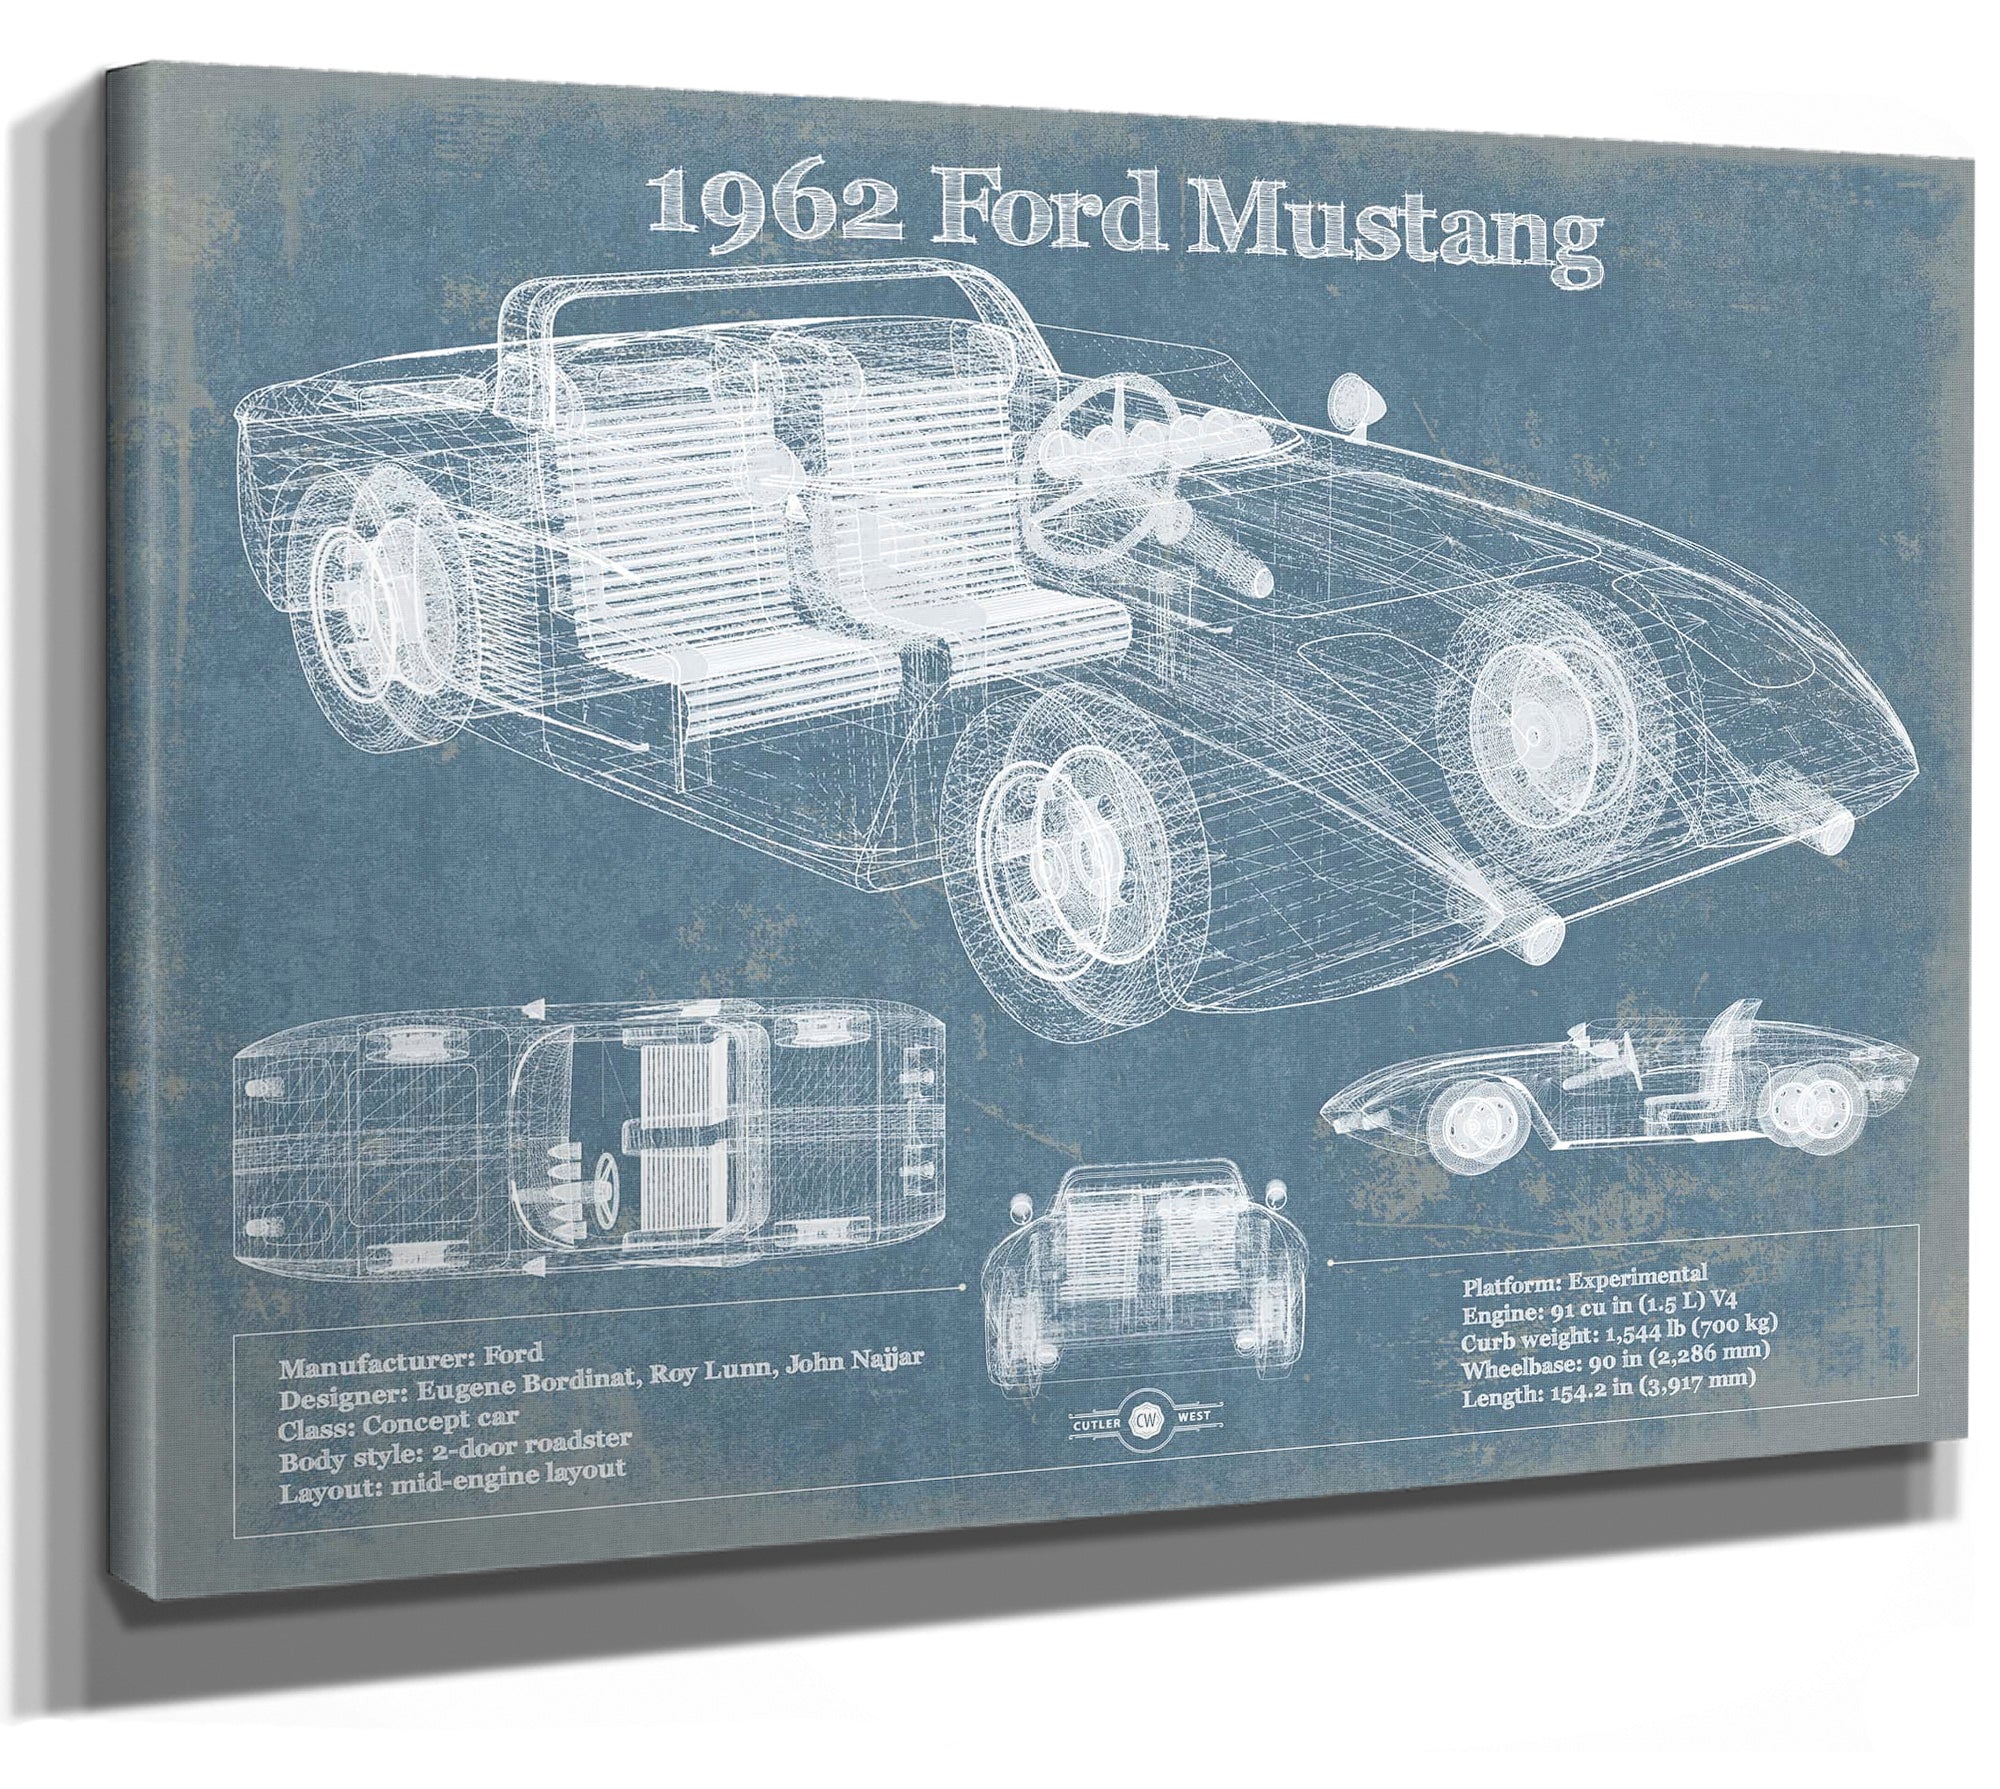 1962 Ford Mustang Vintage Blueprint Auto Print